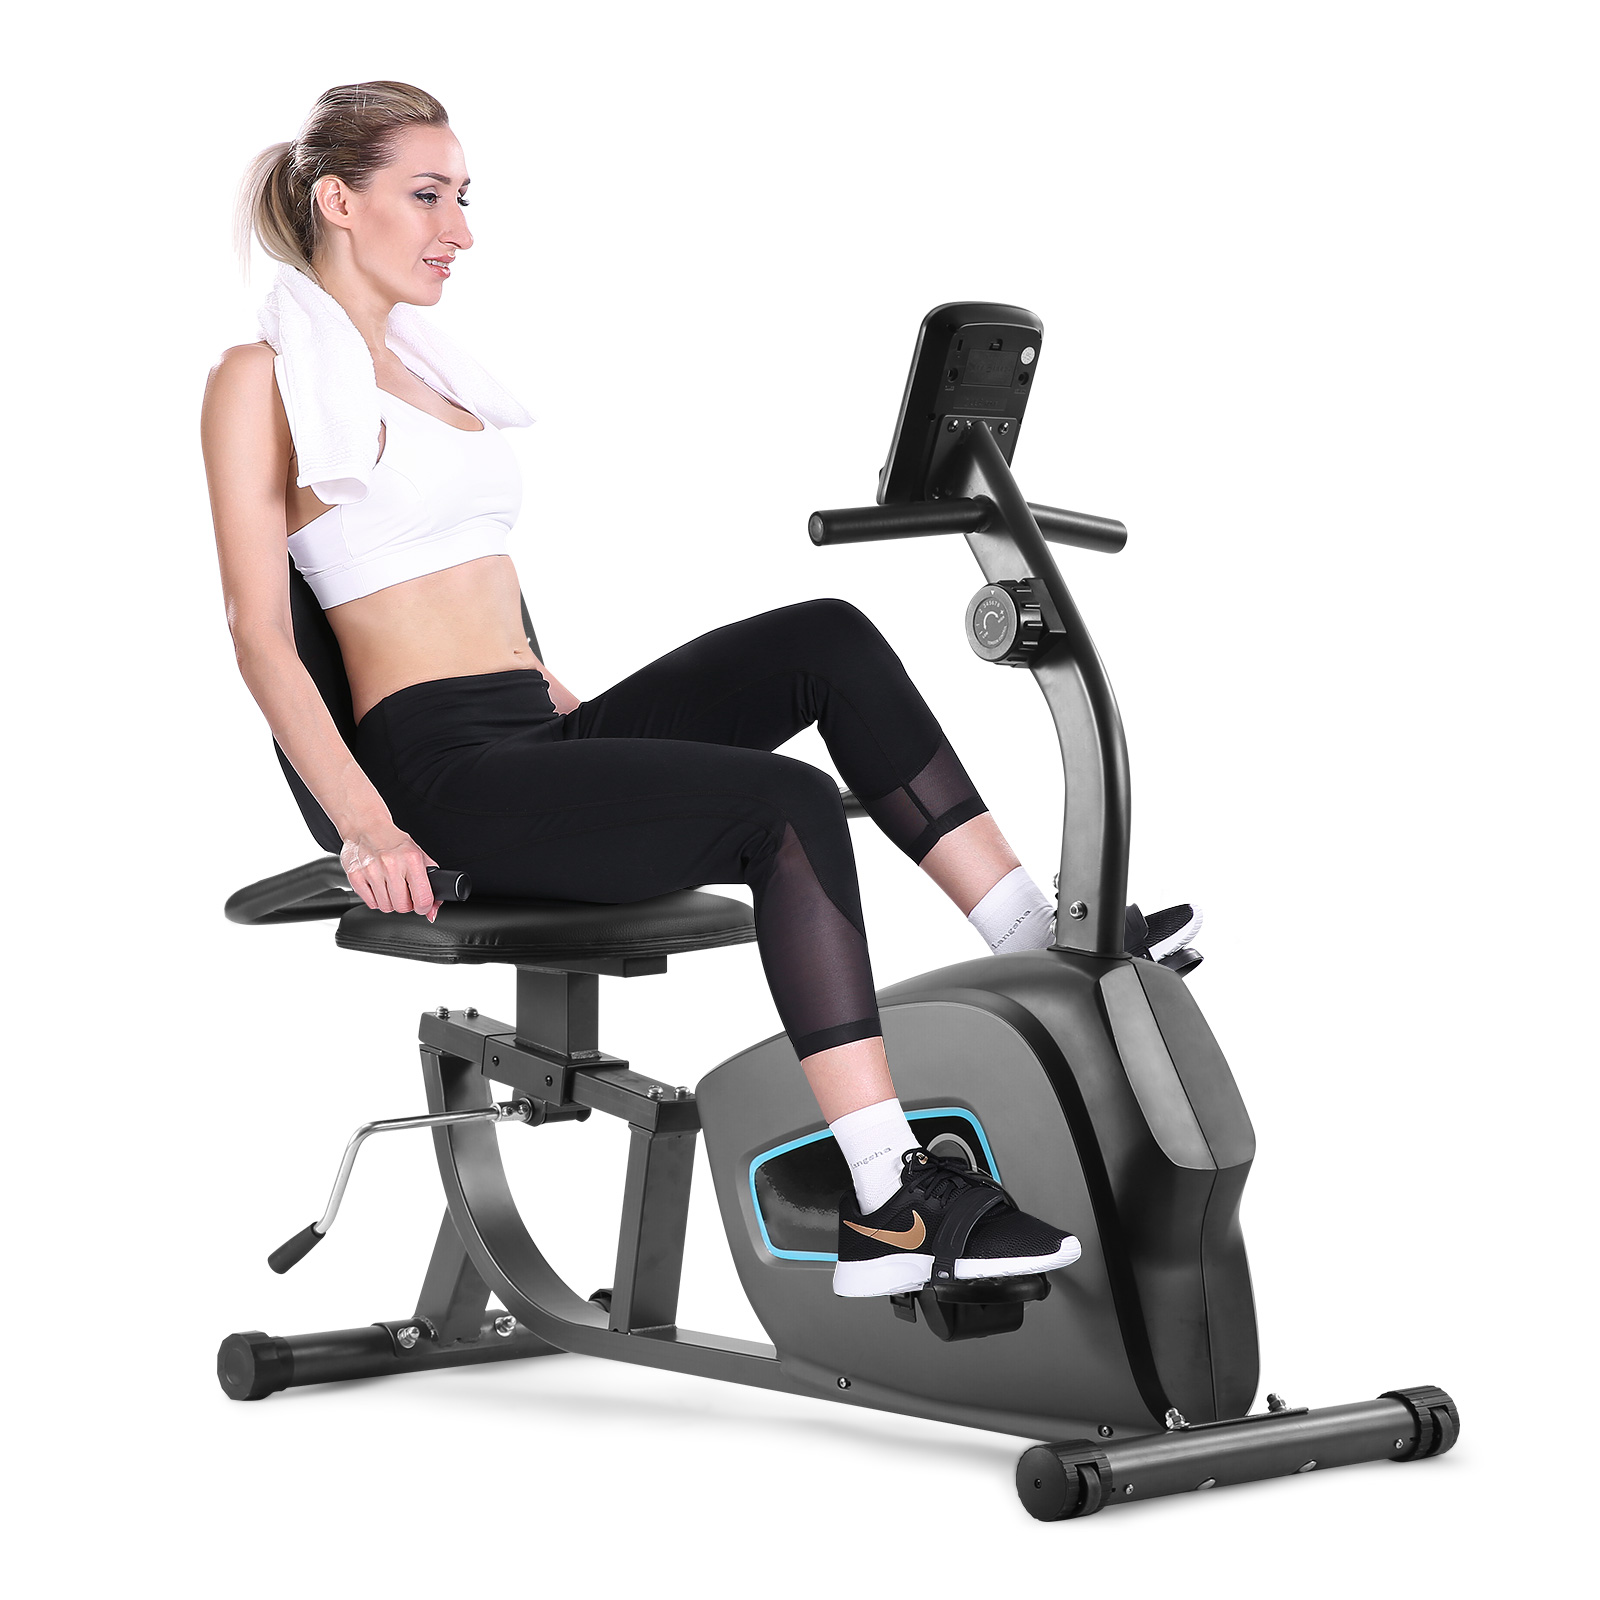 Maxkare Exercise Bike Indoor Recumbent  Exercise Bike Stationary with Adjustable Seat and 8 Resistance Level Seat Height Adjustment - image 3 of 13